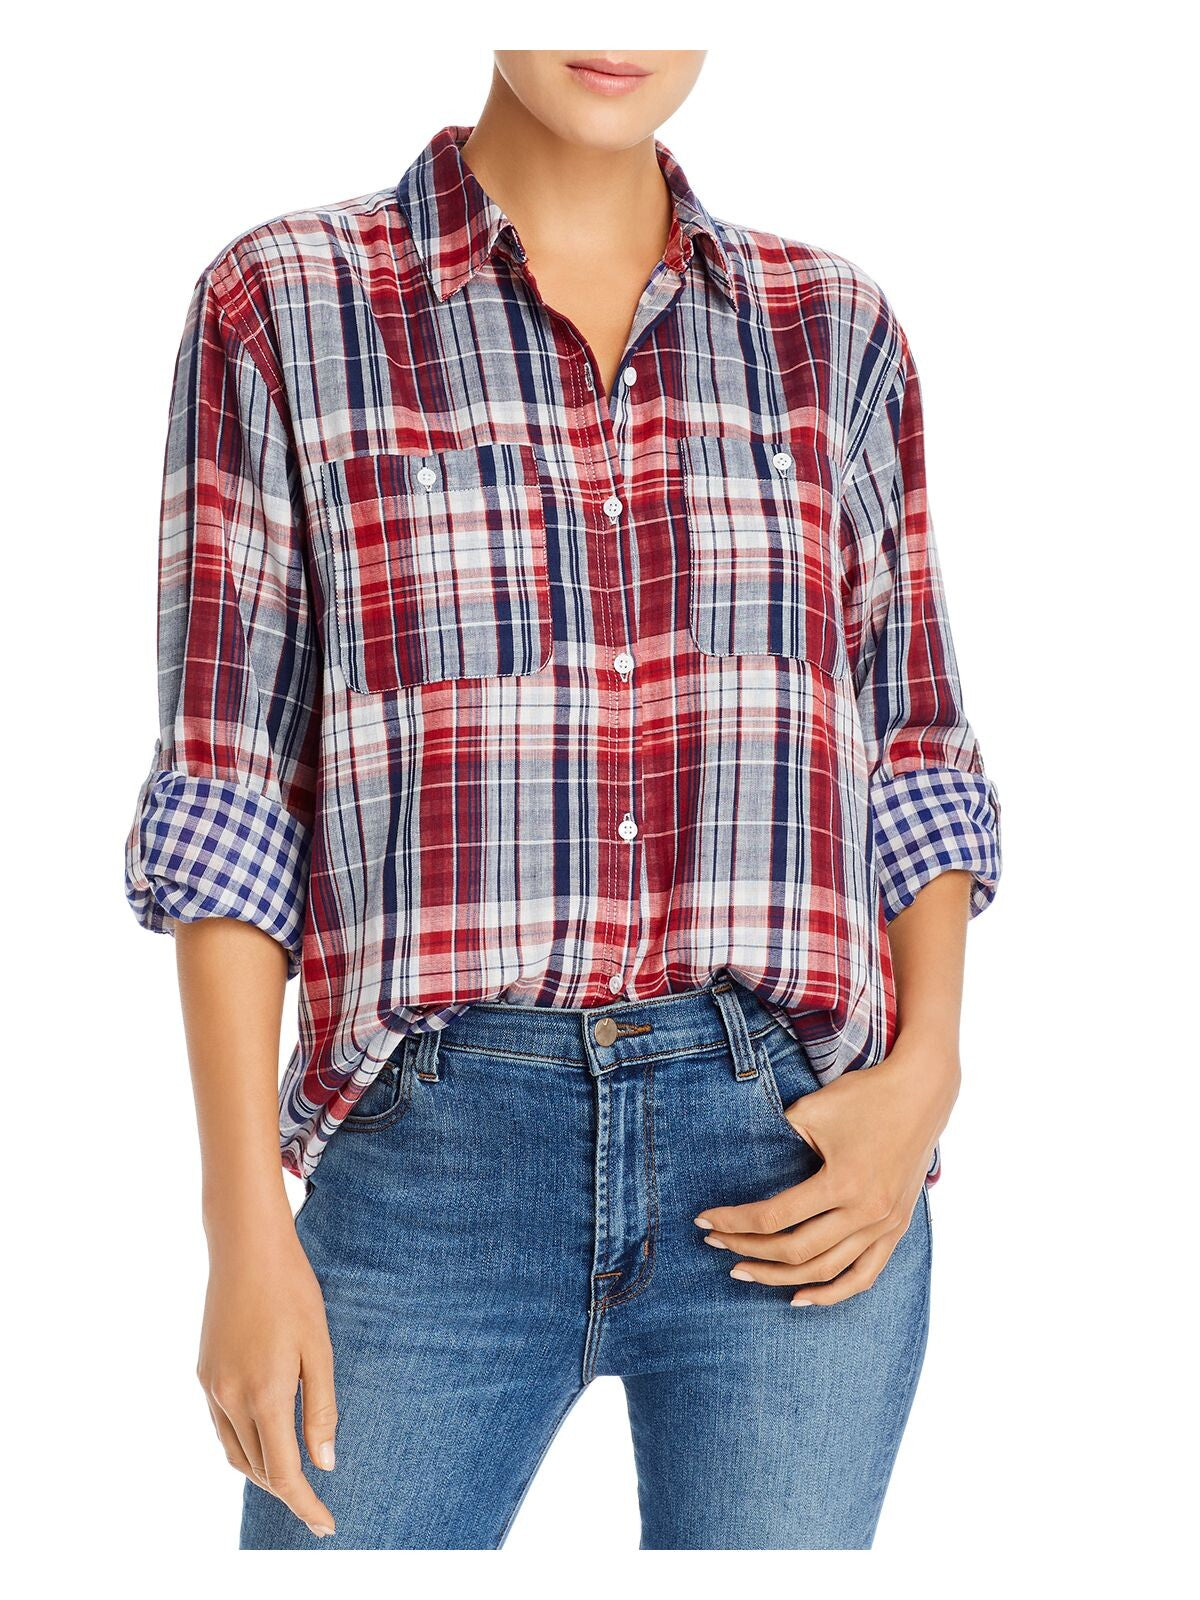 JOIE Womens Red Plaid Cuffed Collared Button Up Top XS